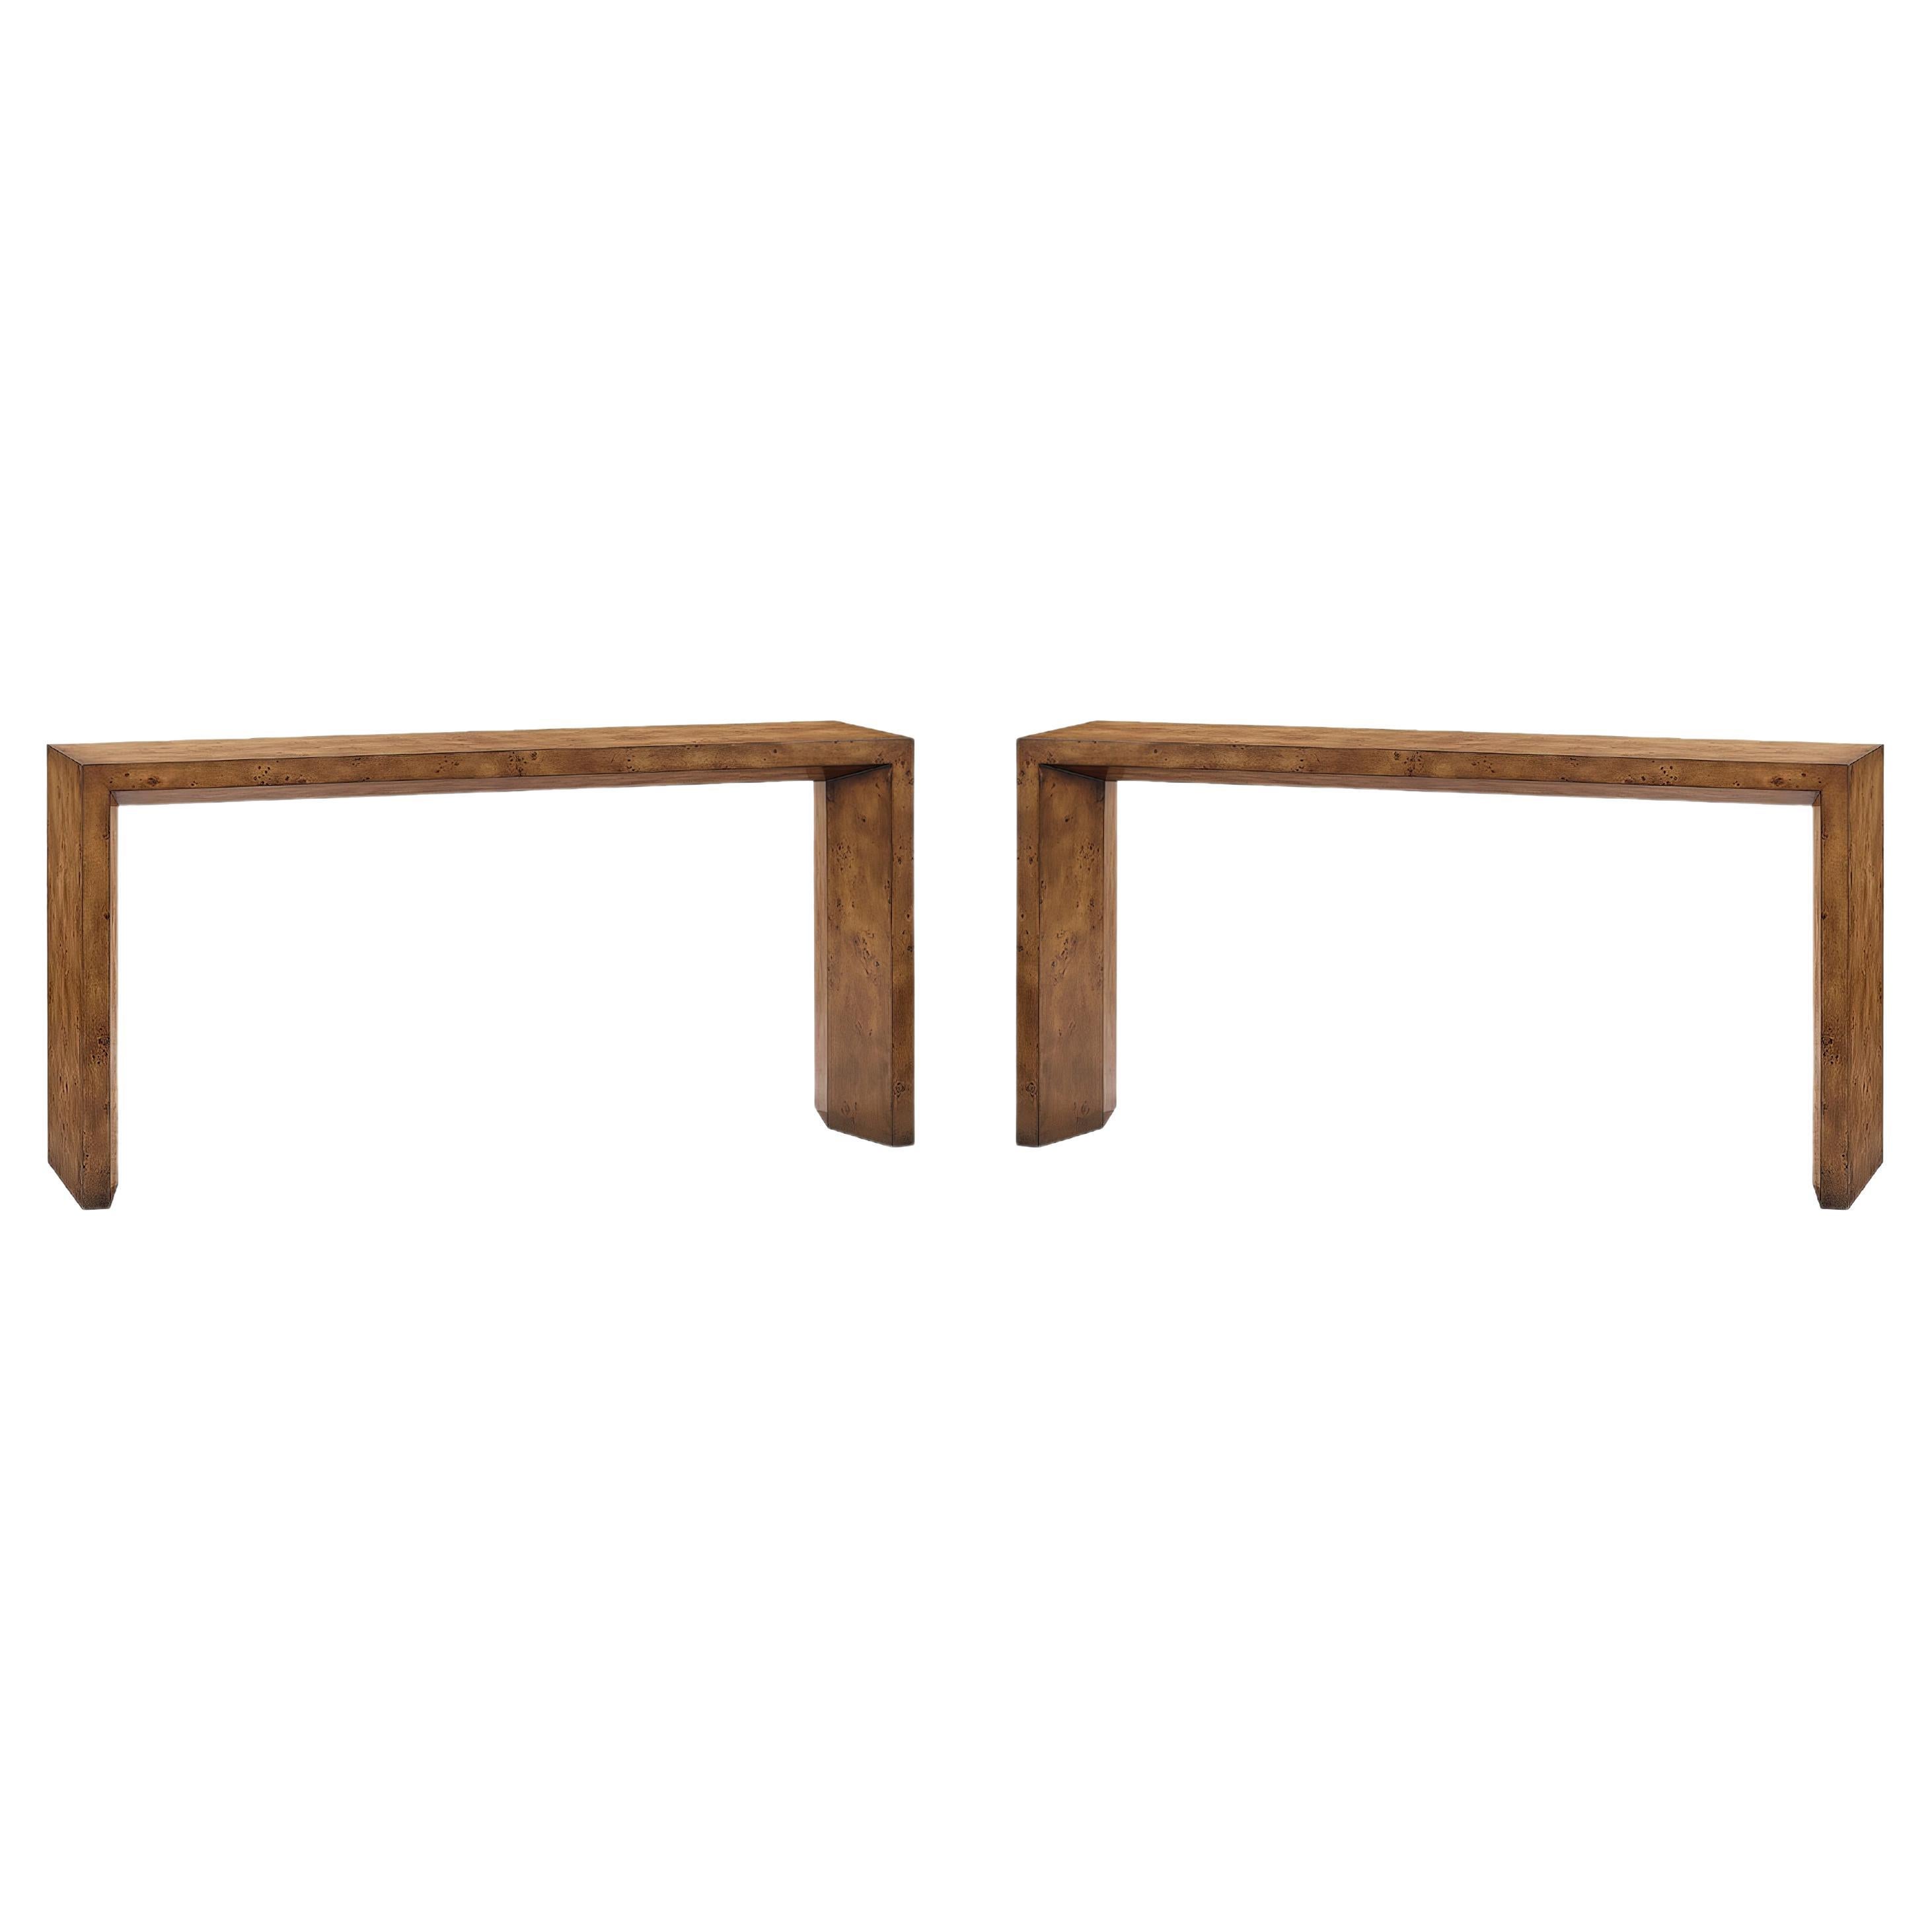 Pair of Midcentury Burl Console Tables